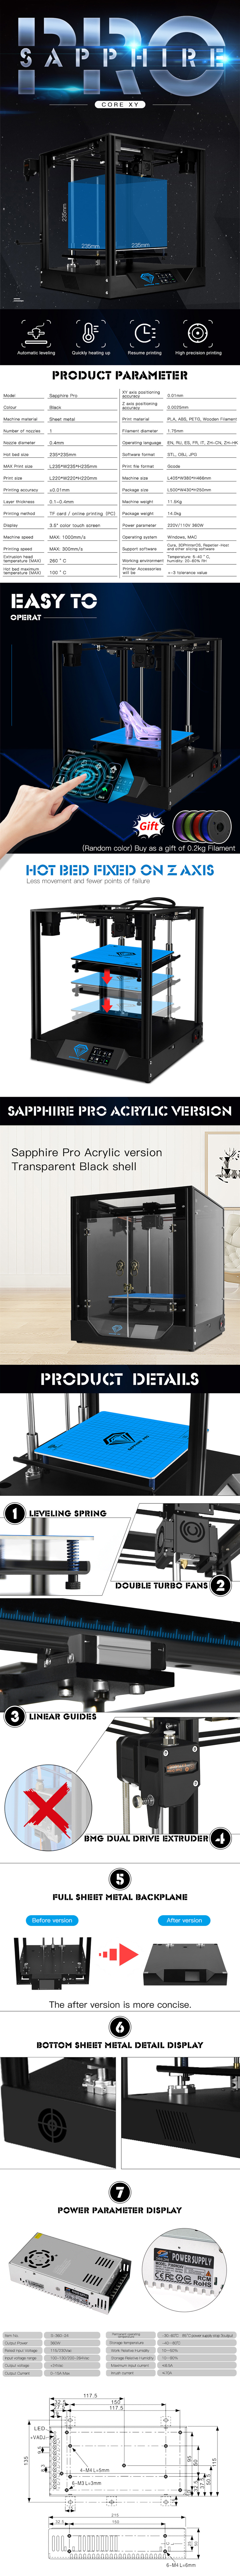 TWO TREES® Sapphire Pro CoreXY DIY 3D Printer Kit 235*235*235mm Printing Size With Upgraded Acrylic Shell 1